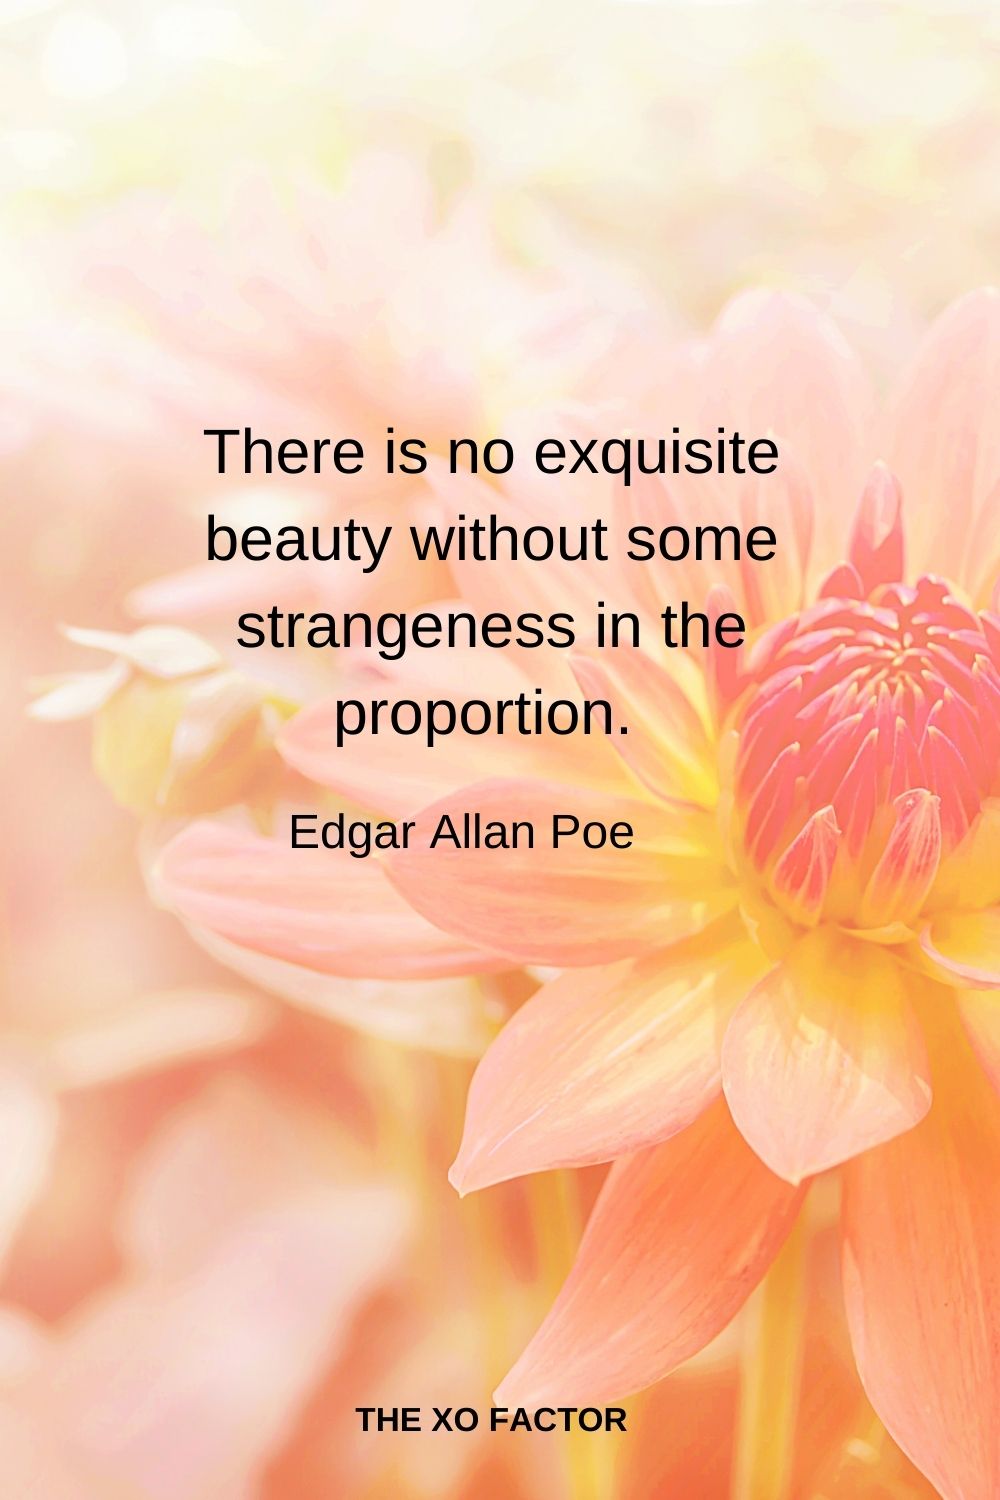 There is no exquisite beauty without some strangeness in the proportion.  Edgar Allan Poe